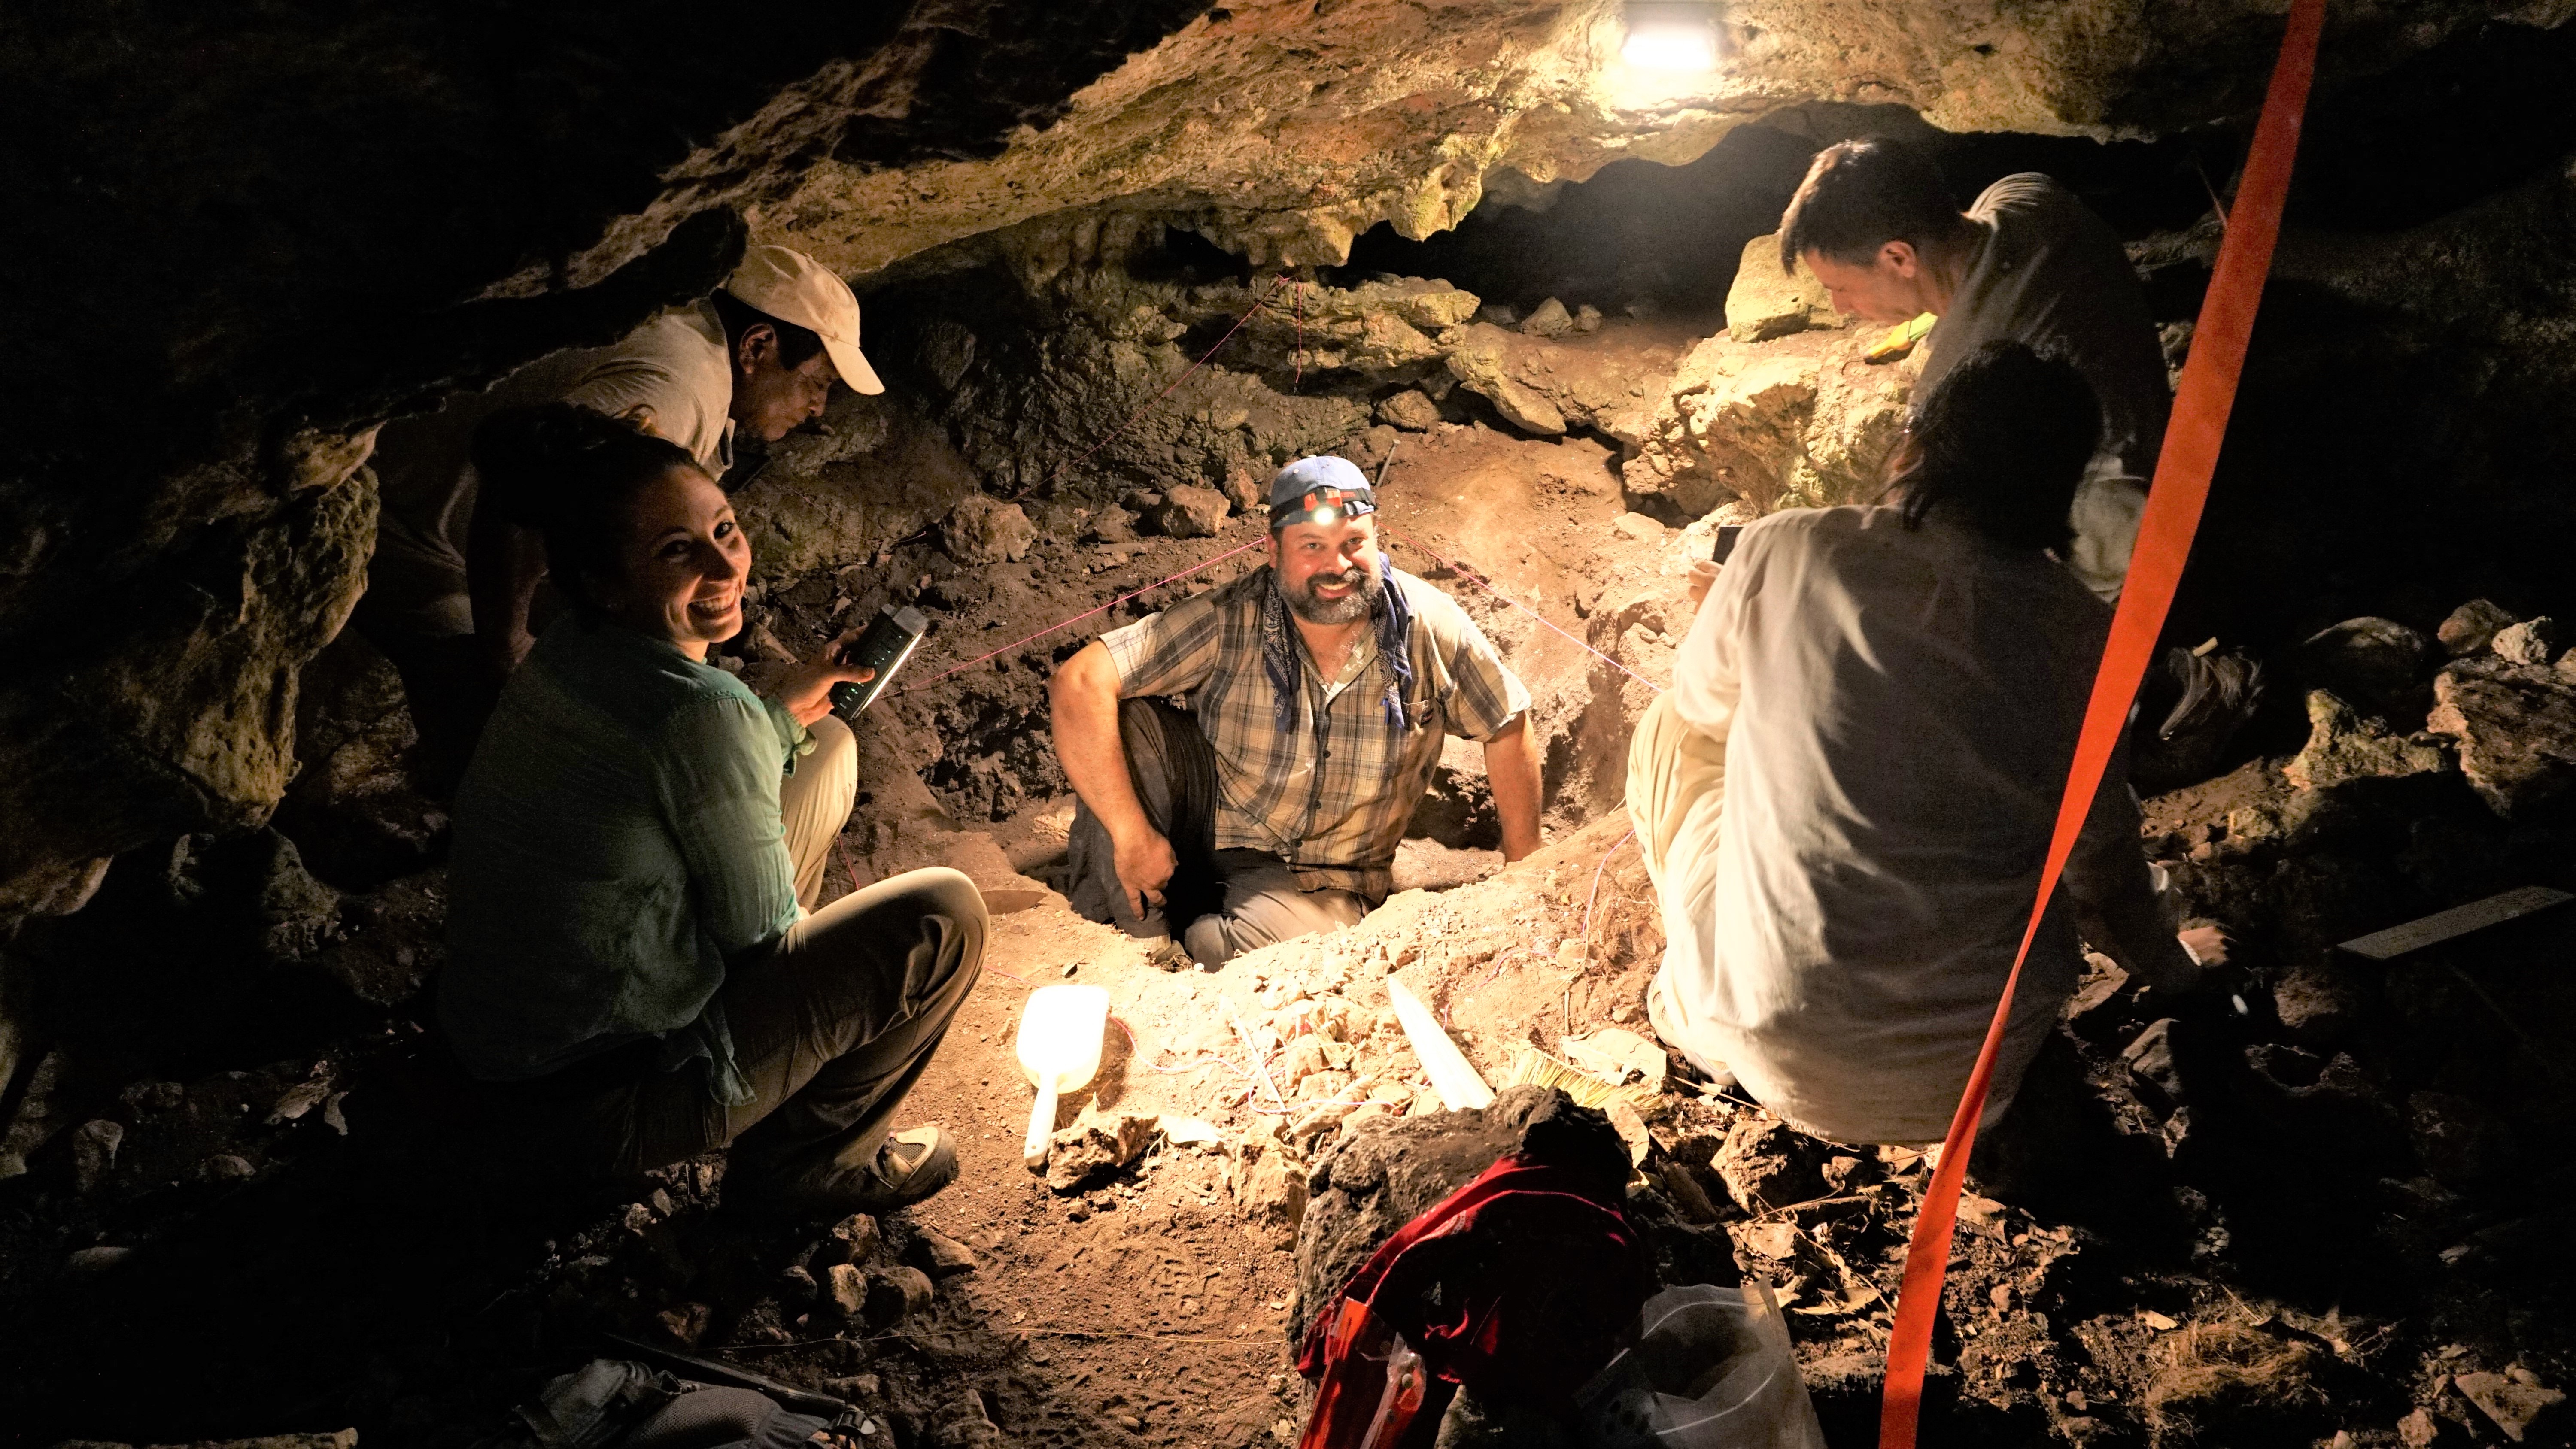 Dr. Spenard and research team in Belizean cave.